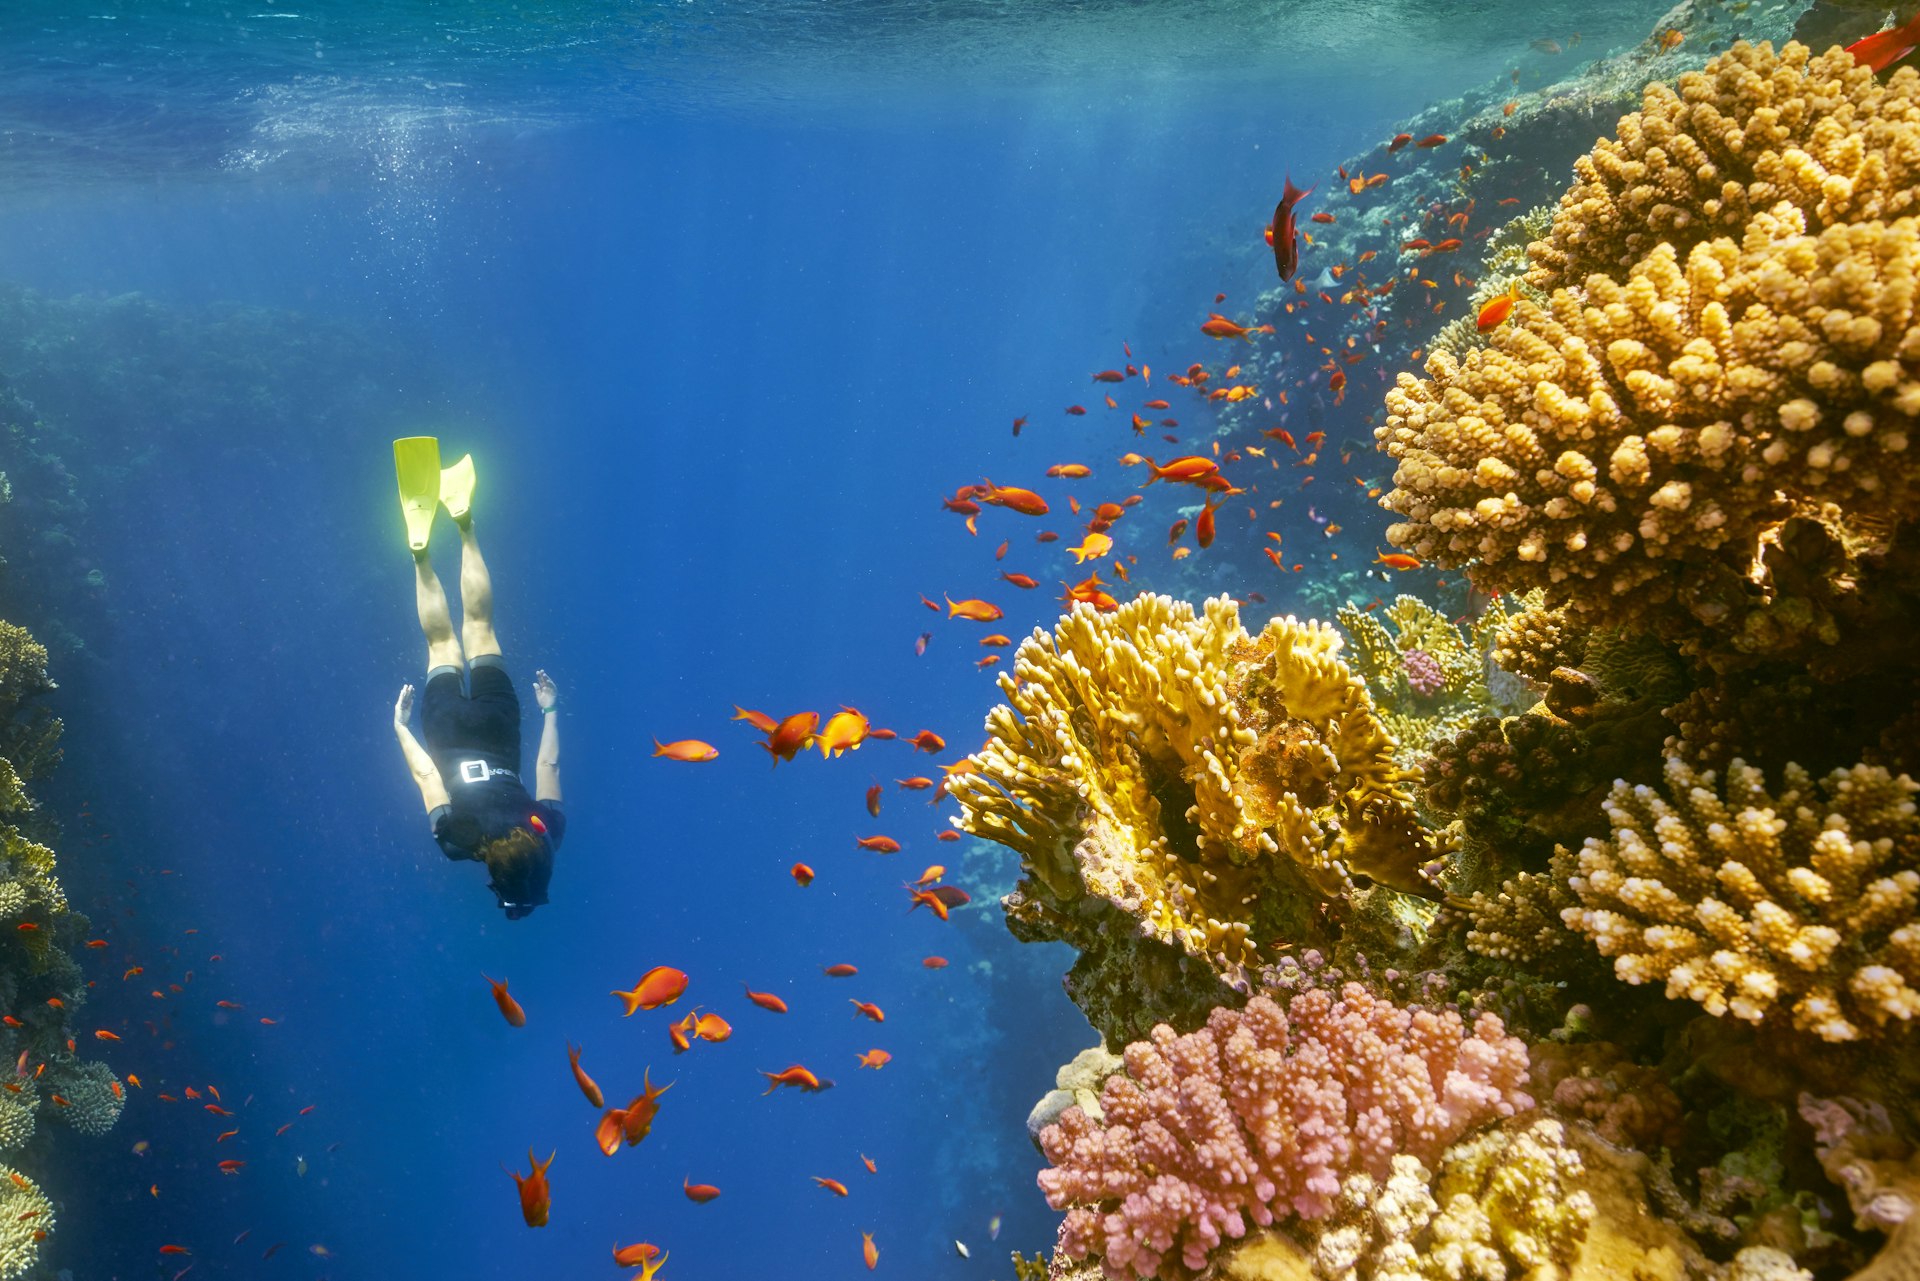 A snorkeler swims near a coral reef in the Red Sea near Dahab, Egypt